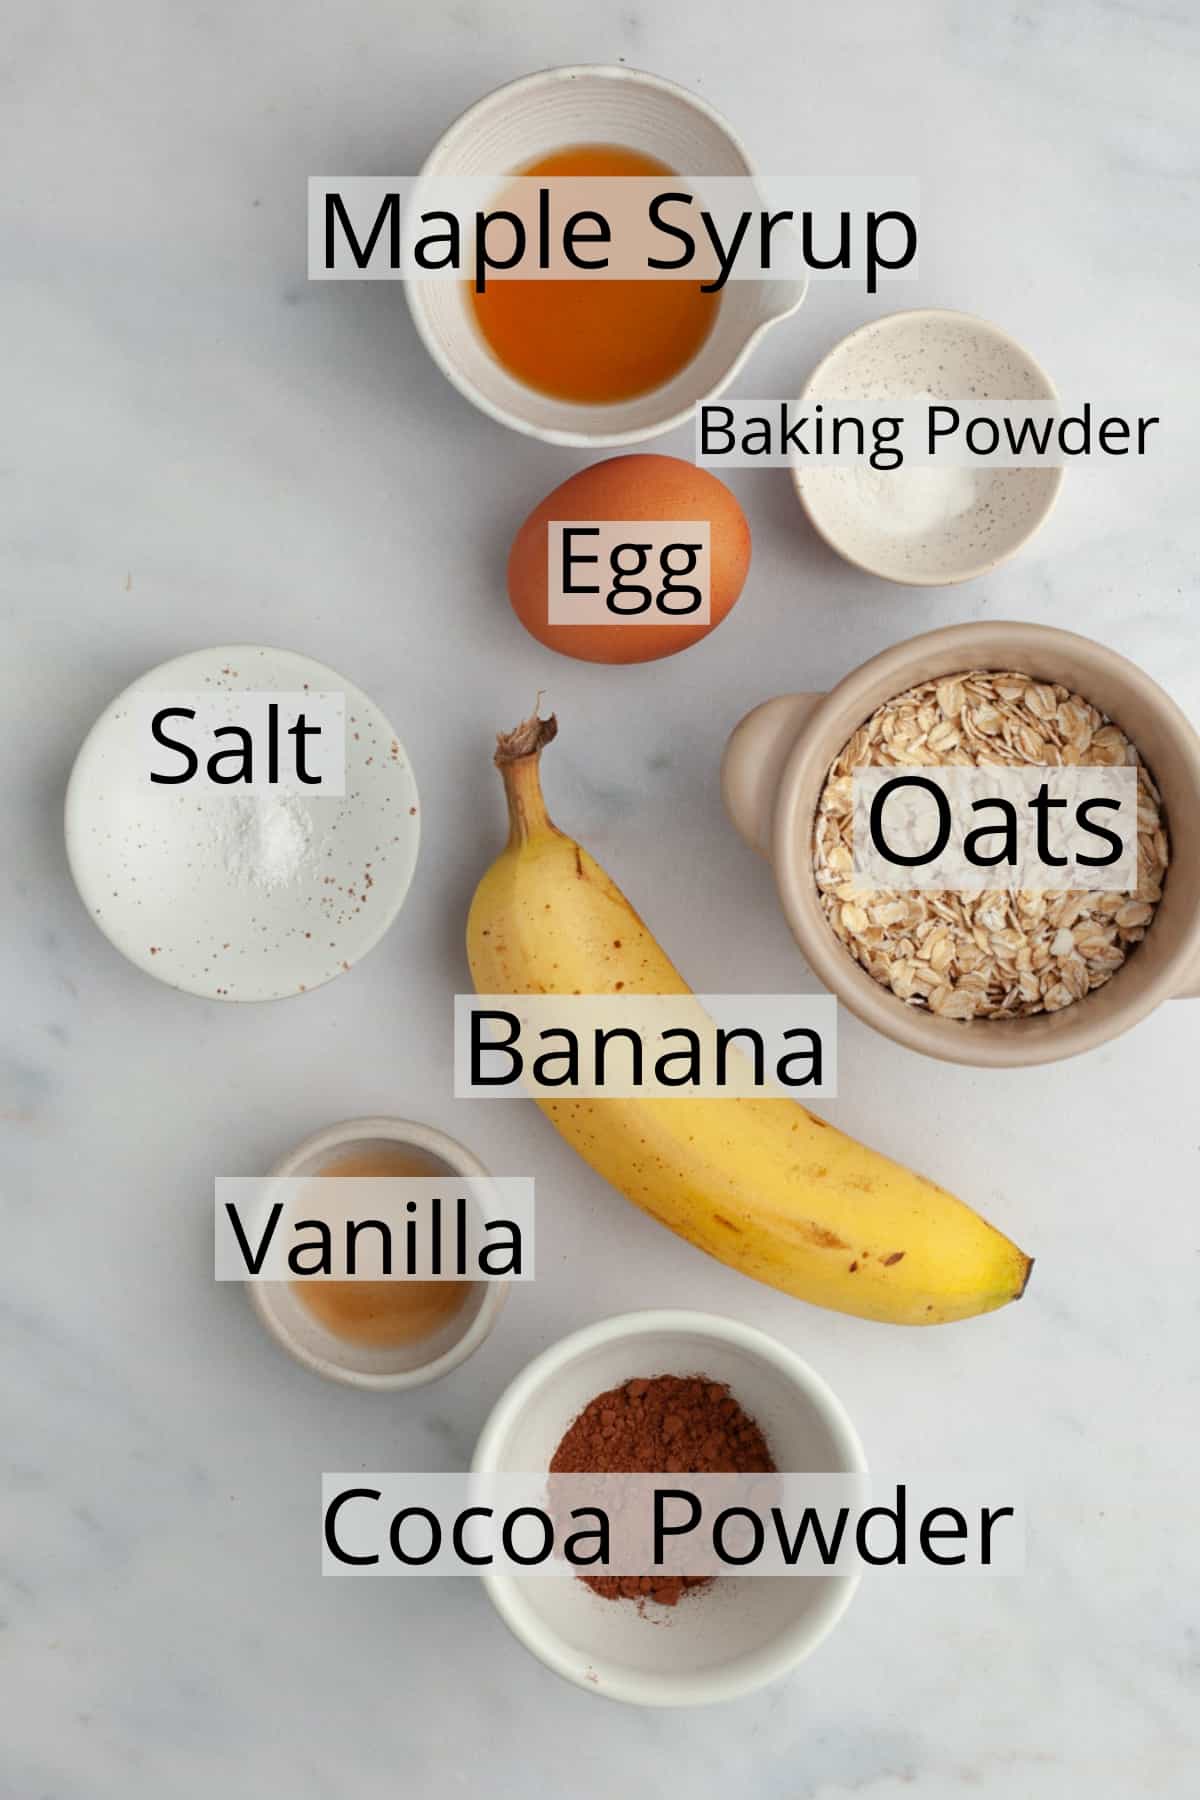 All the ingredients needed to make chocolate baked oatmeal, weighed out into small bowls.